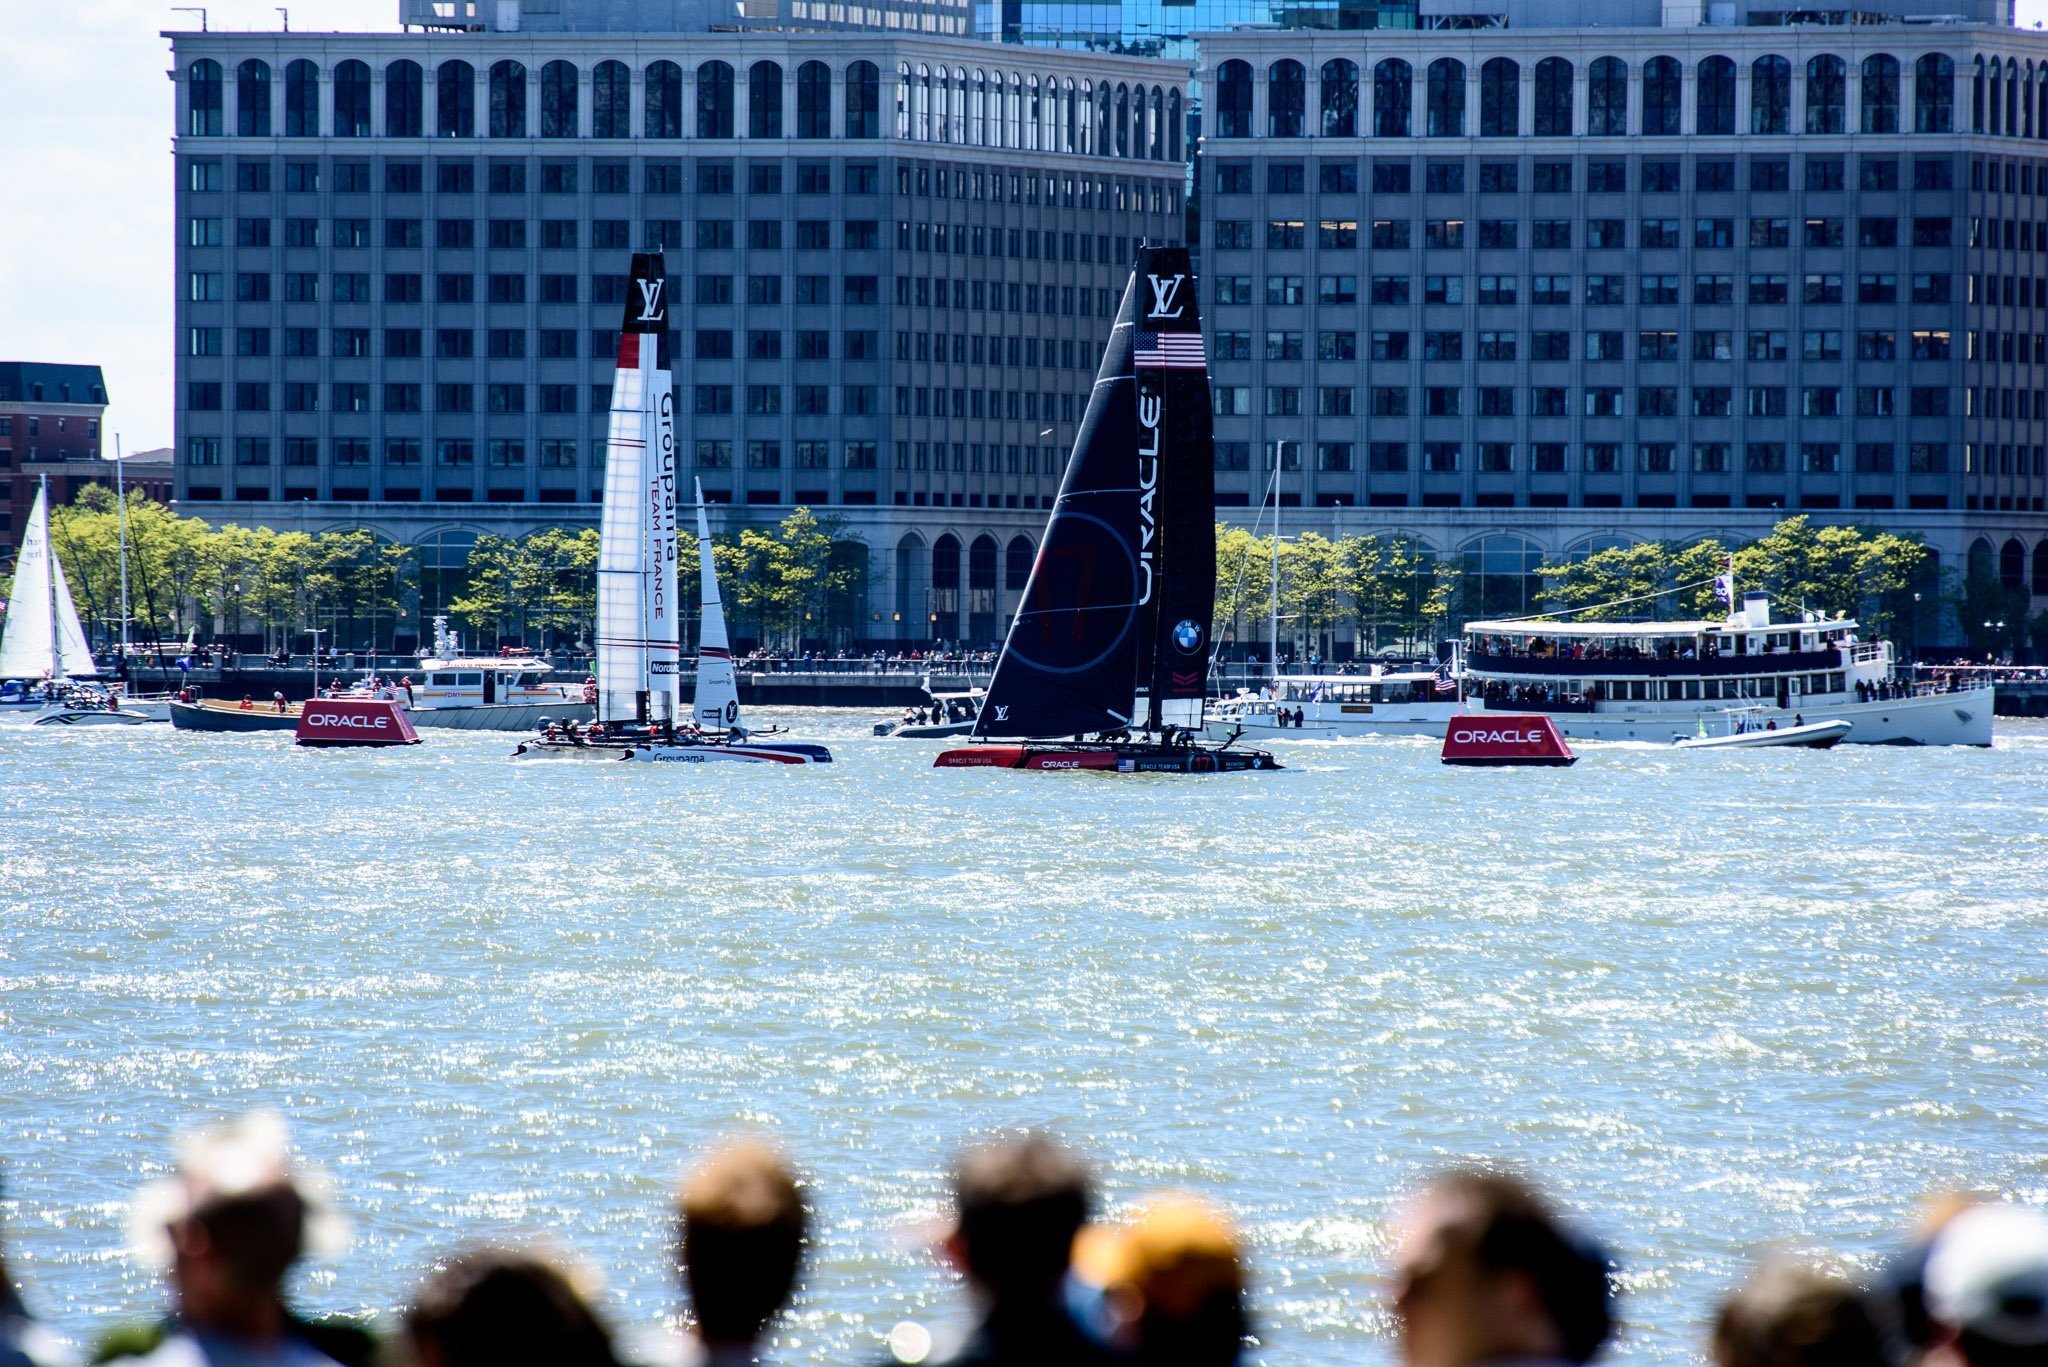 Oracle and team France America's Cup